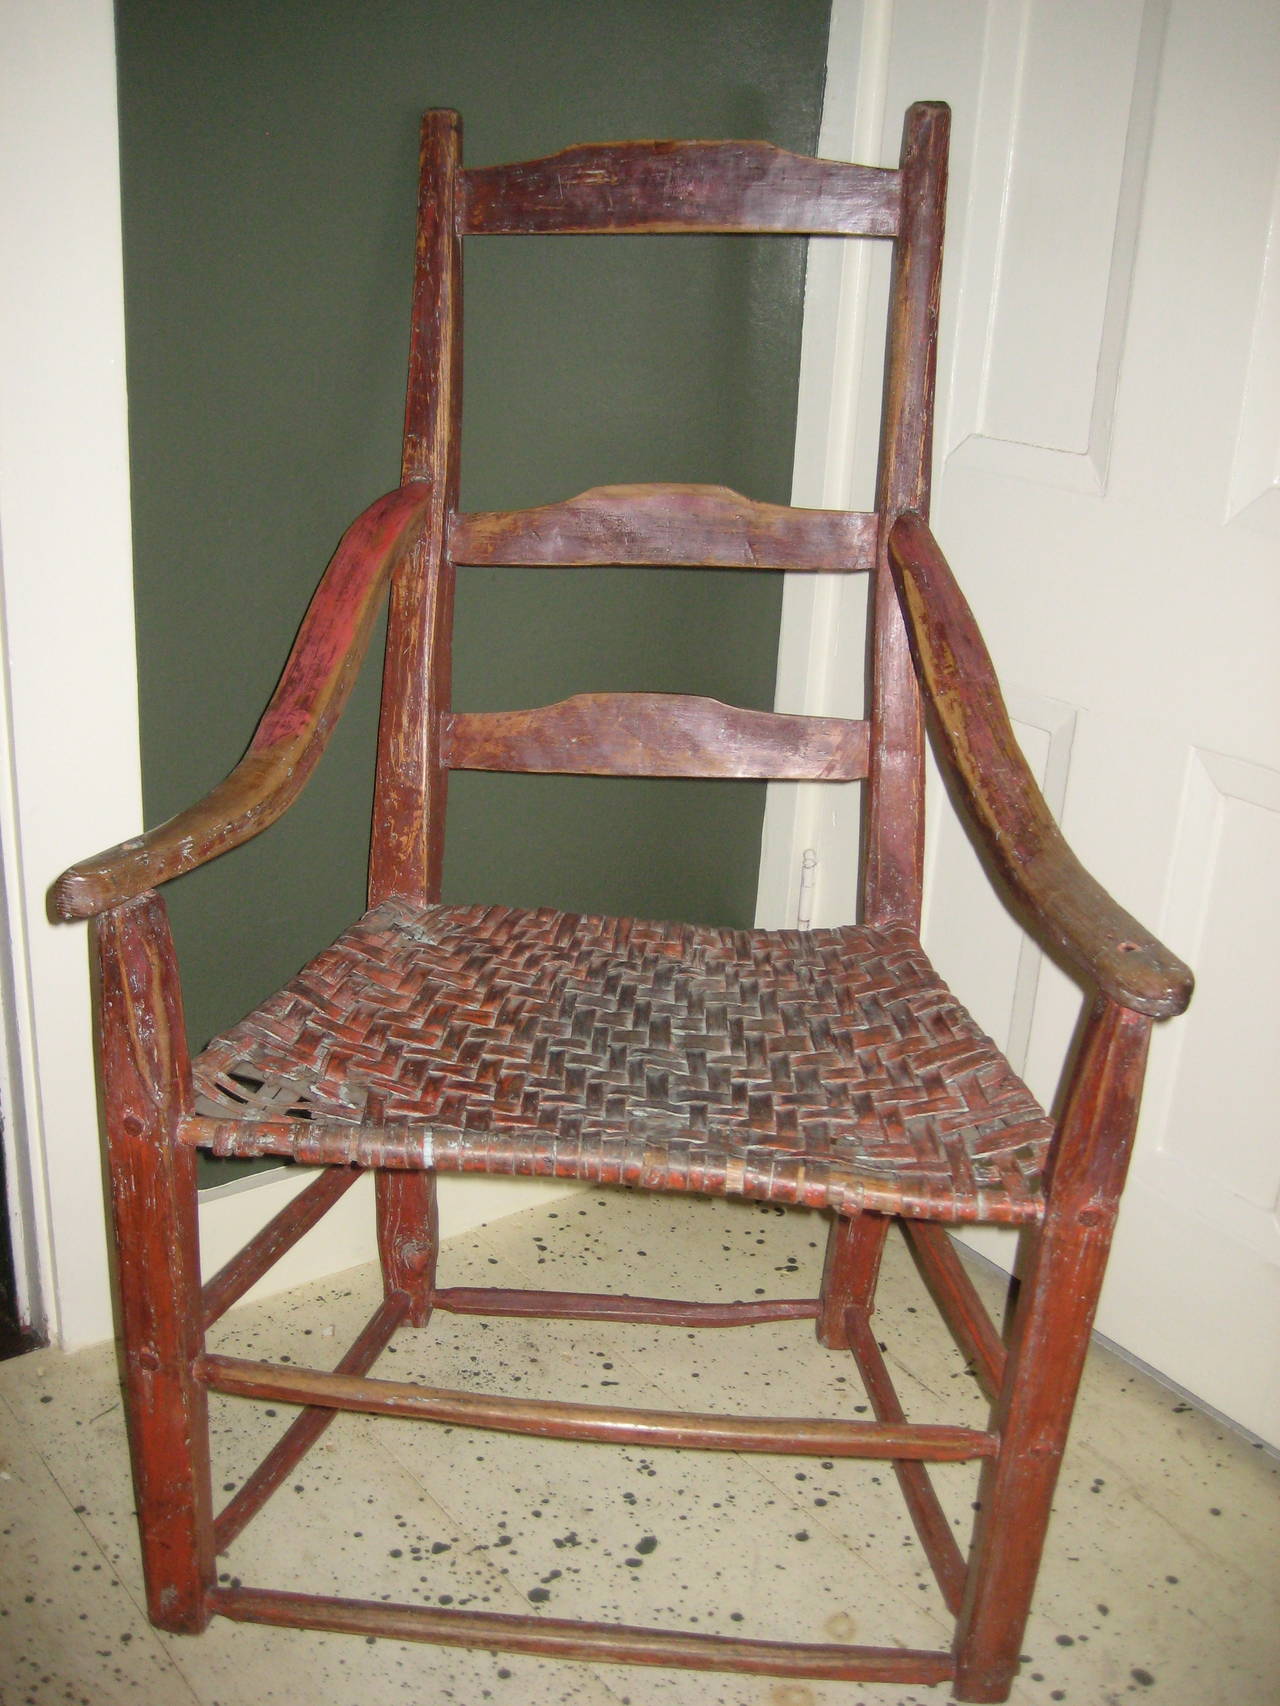 Late 18th century Canadian ladderback armchair in red paint with sloping arms and woven hickory seat.  In original, as found condition, paint on frame and seat likely original.  A true country piece with fairly rudimentary carved frame components.